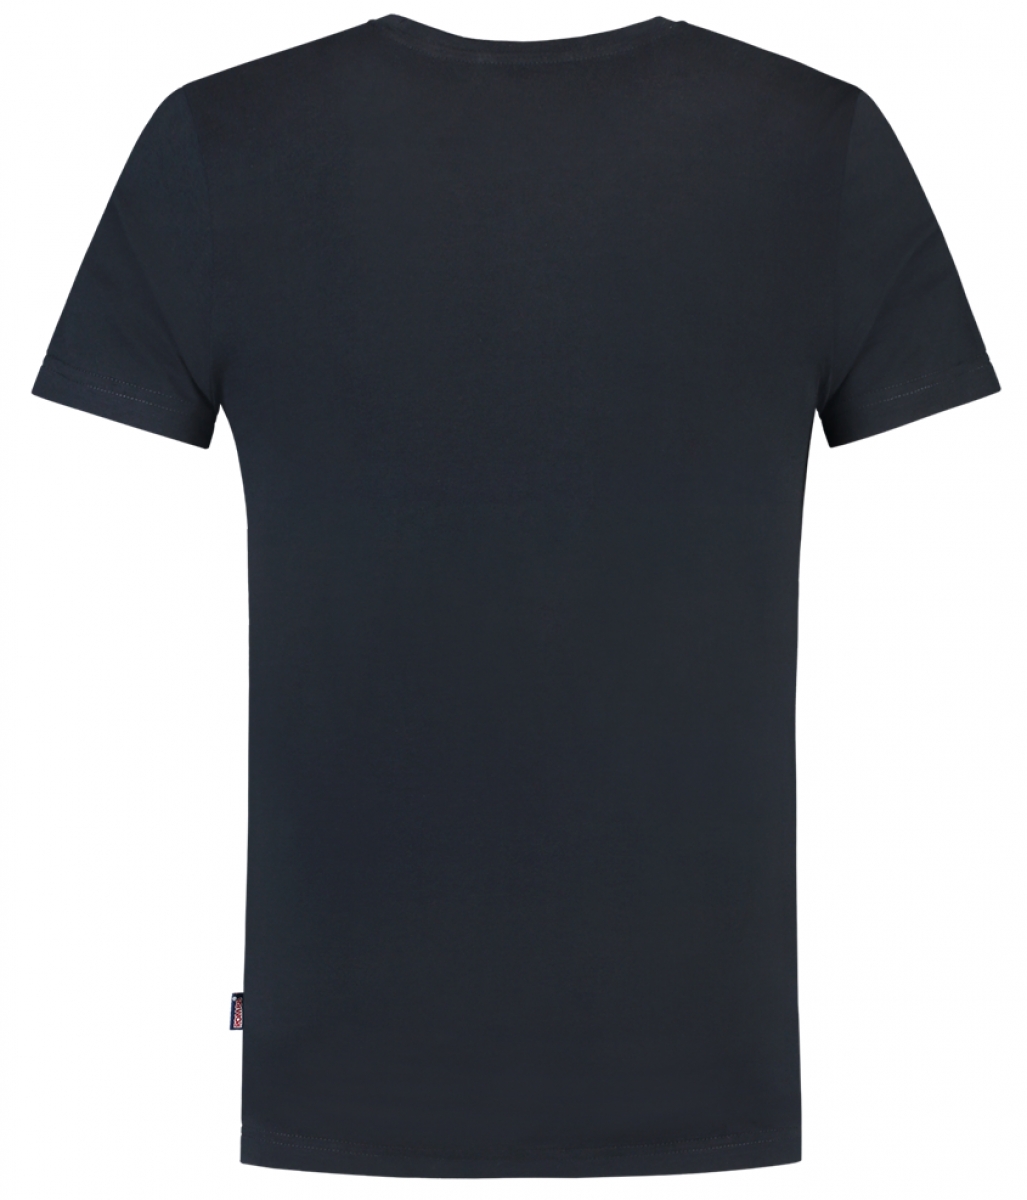 TRICORP-Worker-Shirts, T-Shirts, Slim Fit, 160 g/m, navy